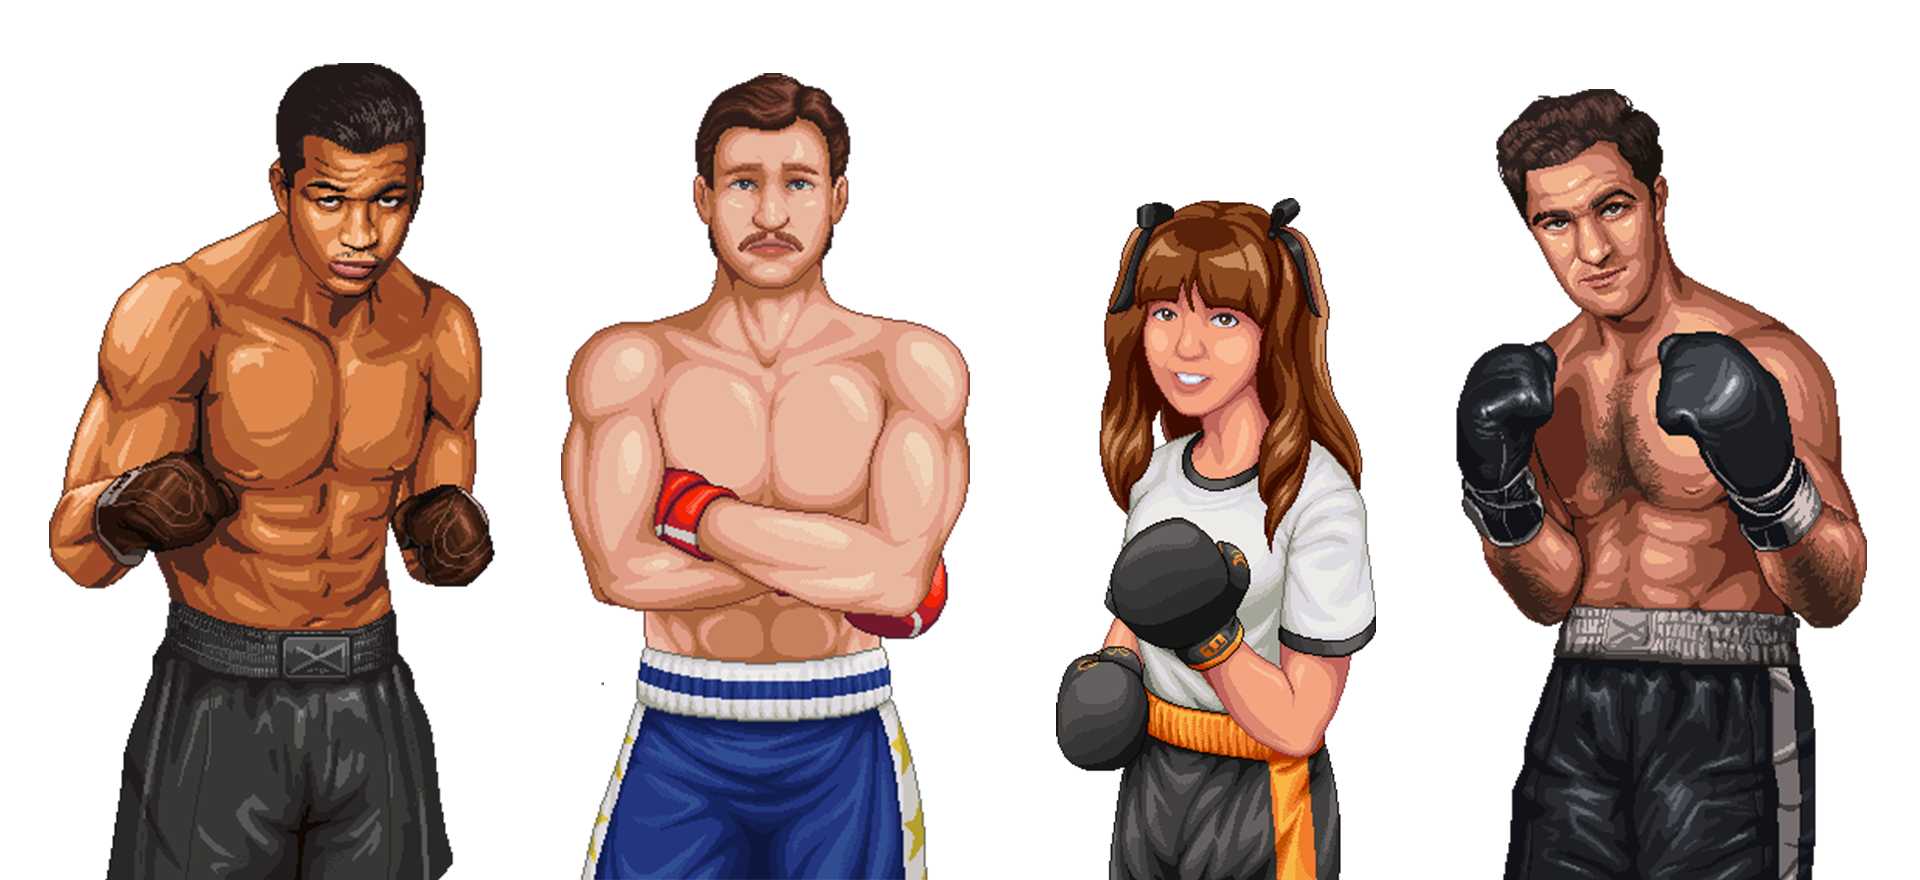 Sue “Tiger Lily” Fox announced for World Championship Boxing Manager 2